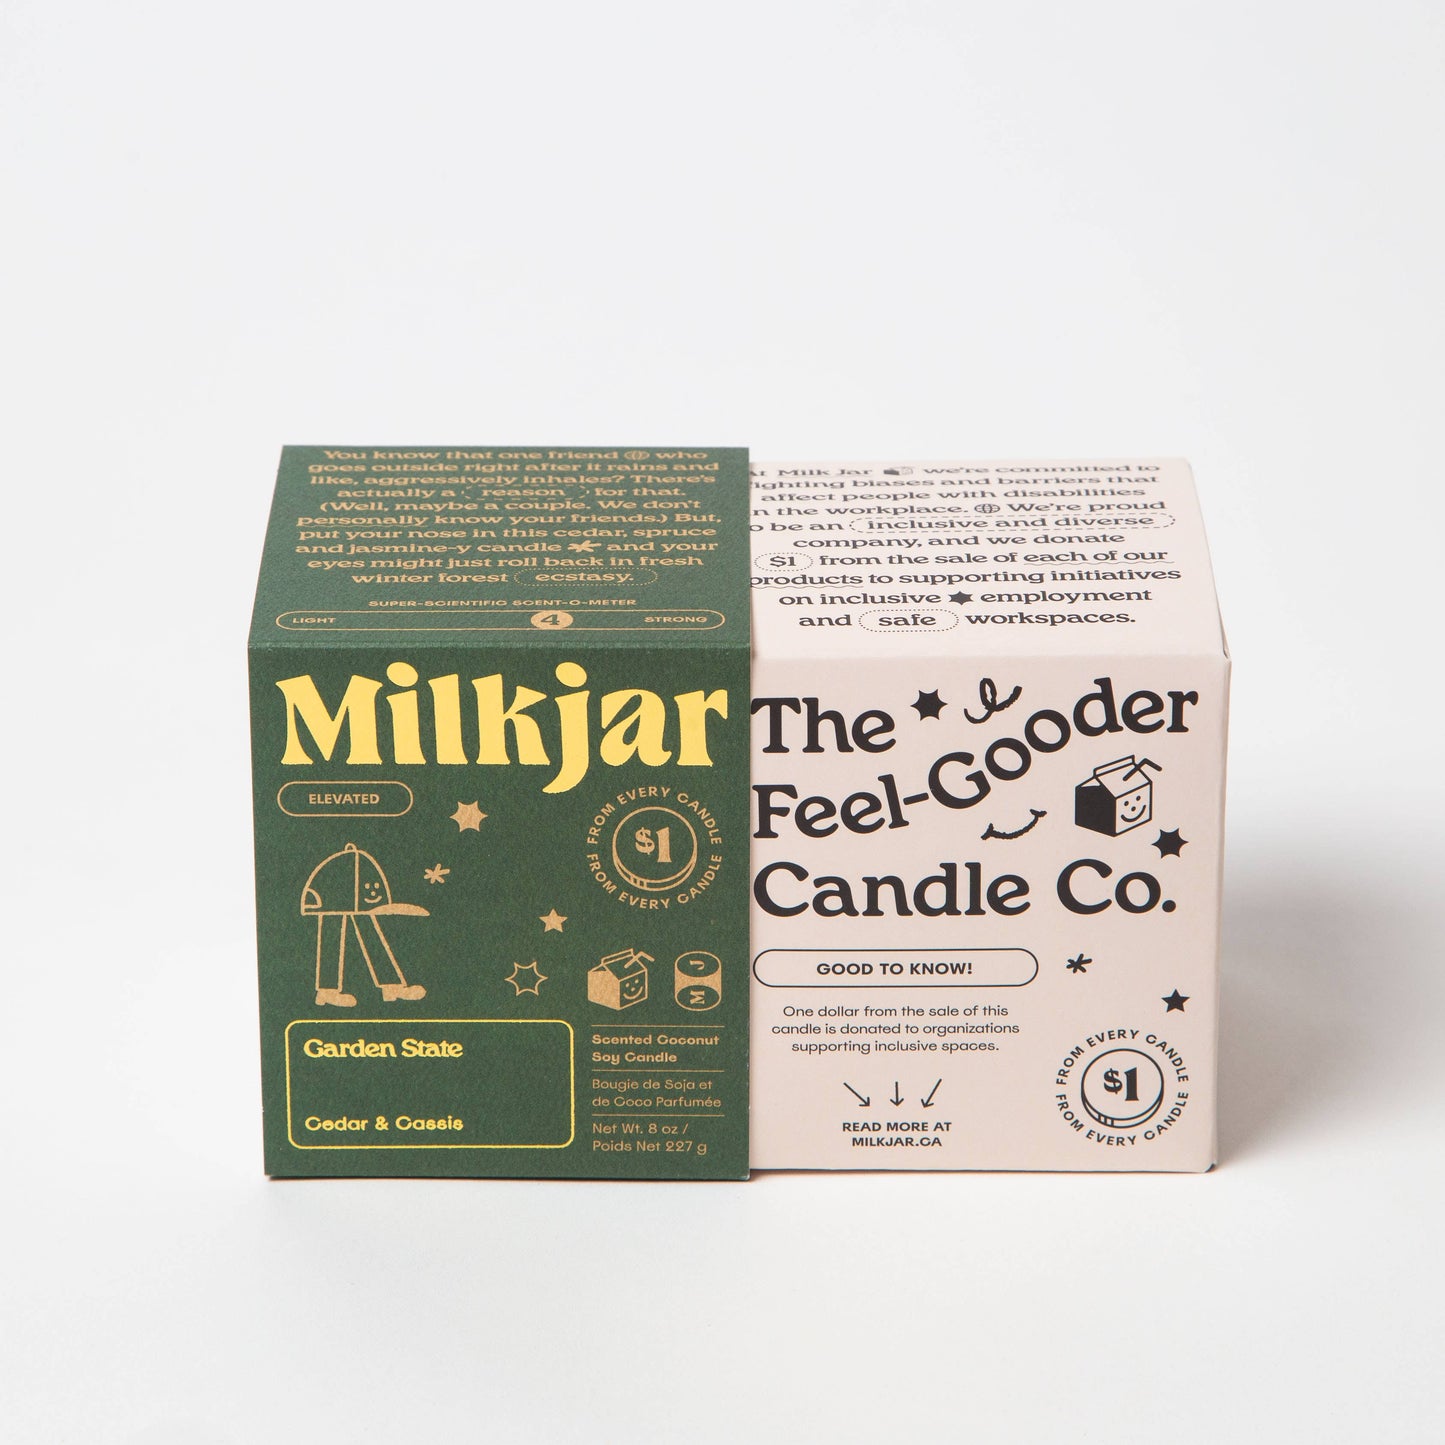 Milk Jar Candle Co. Garden State Scented Candle - Osmology Scented Candles & Home Fragrance